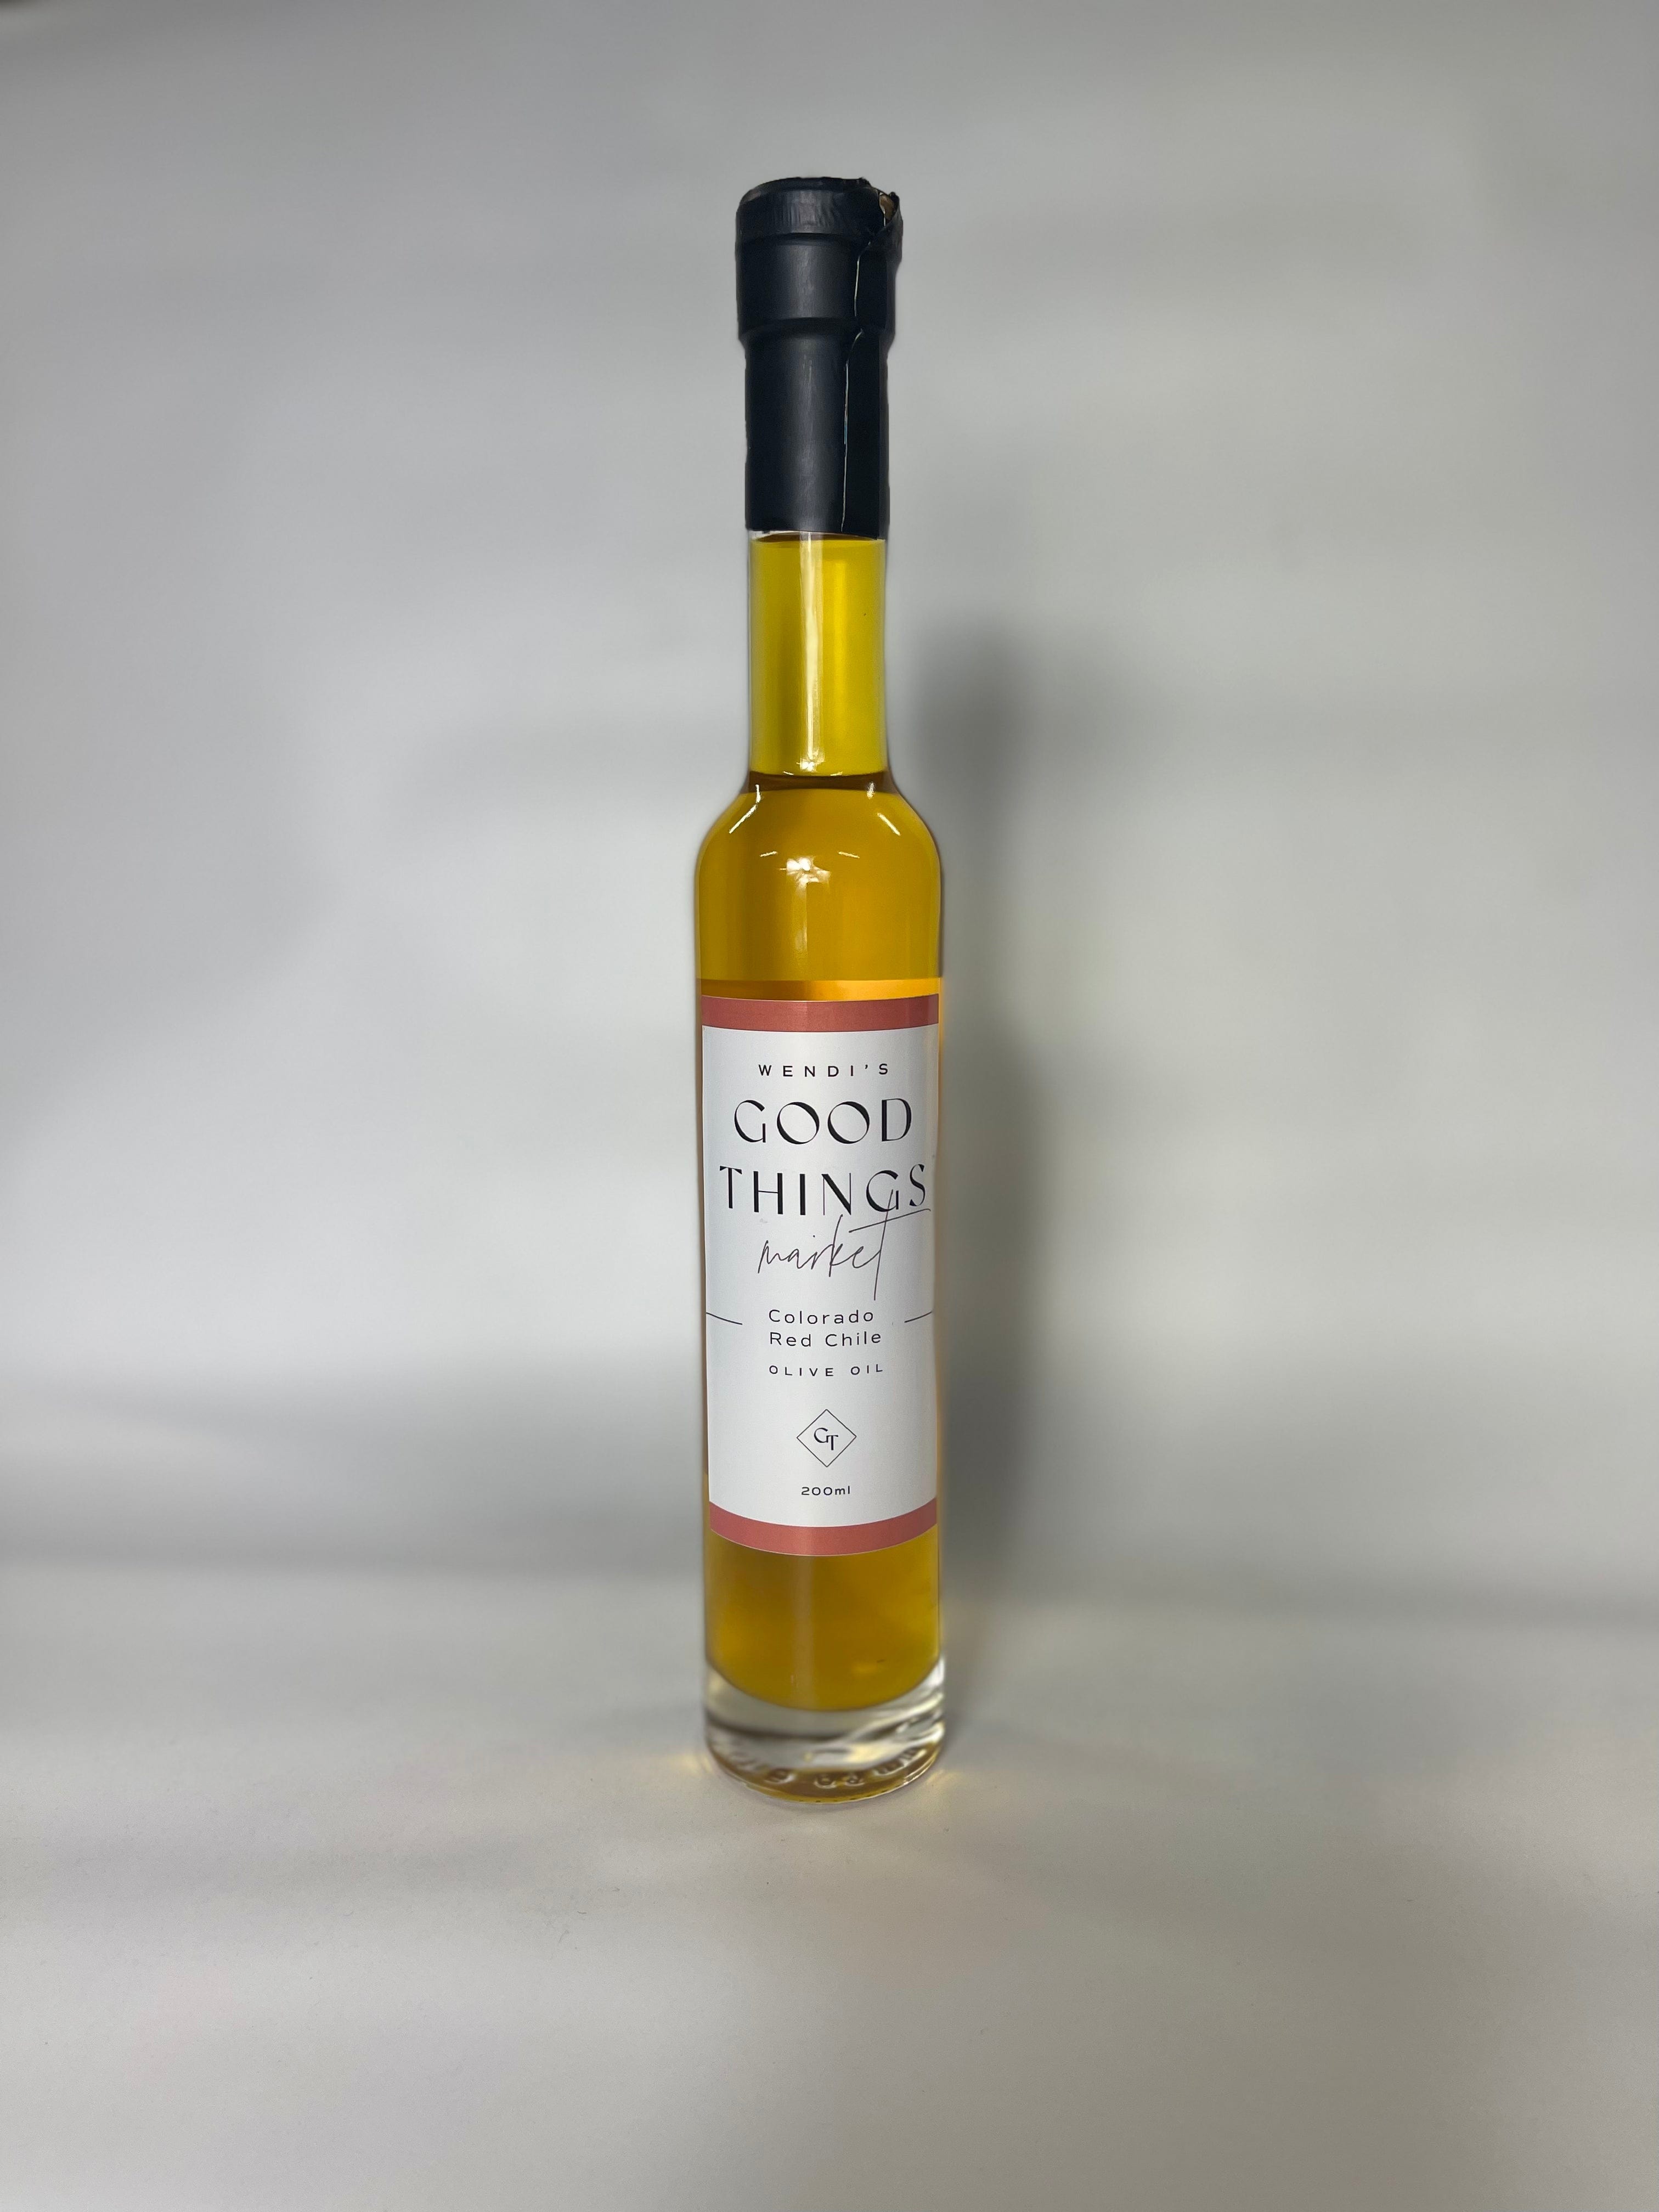 Red Chile olive oil, Wendi's Good Things Market